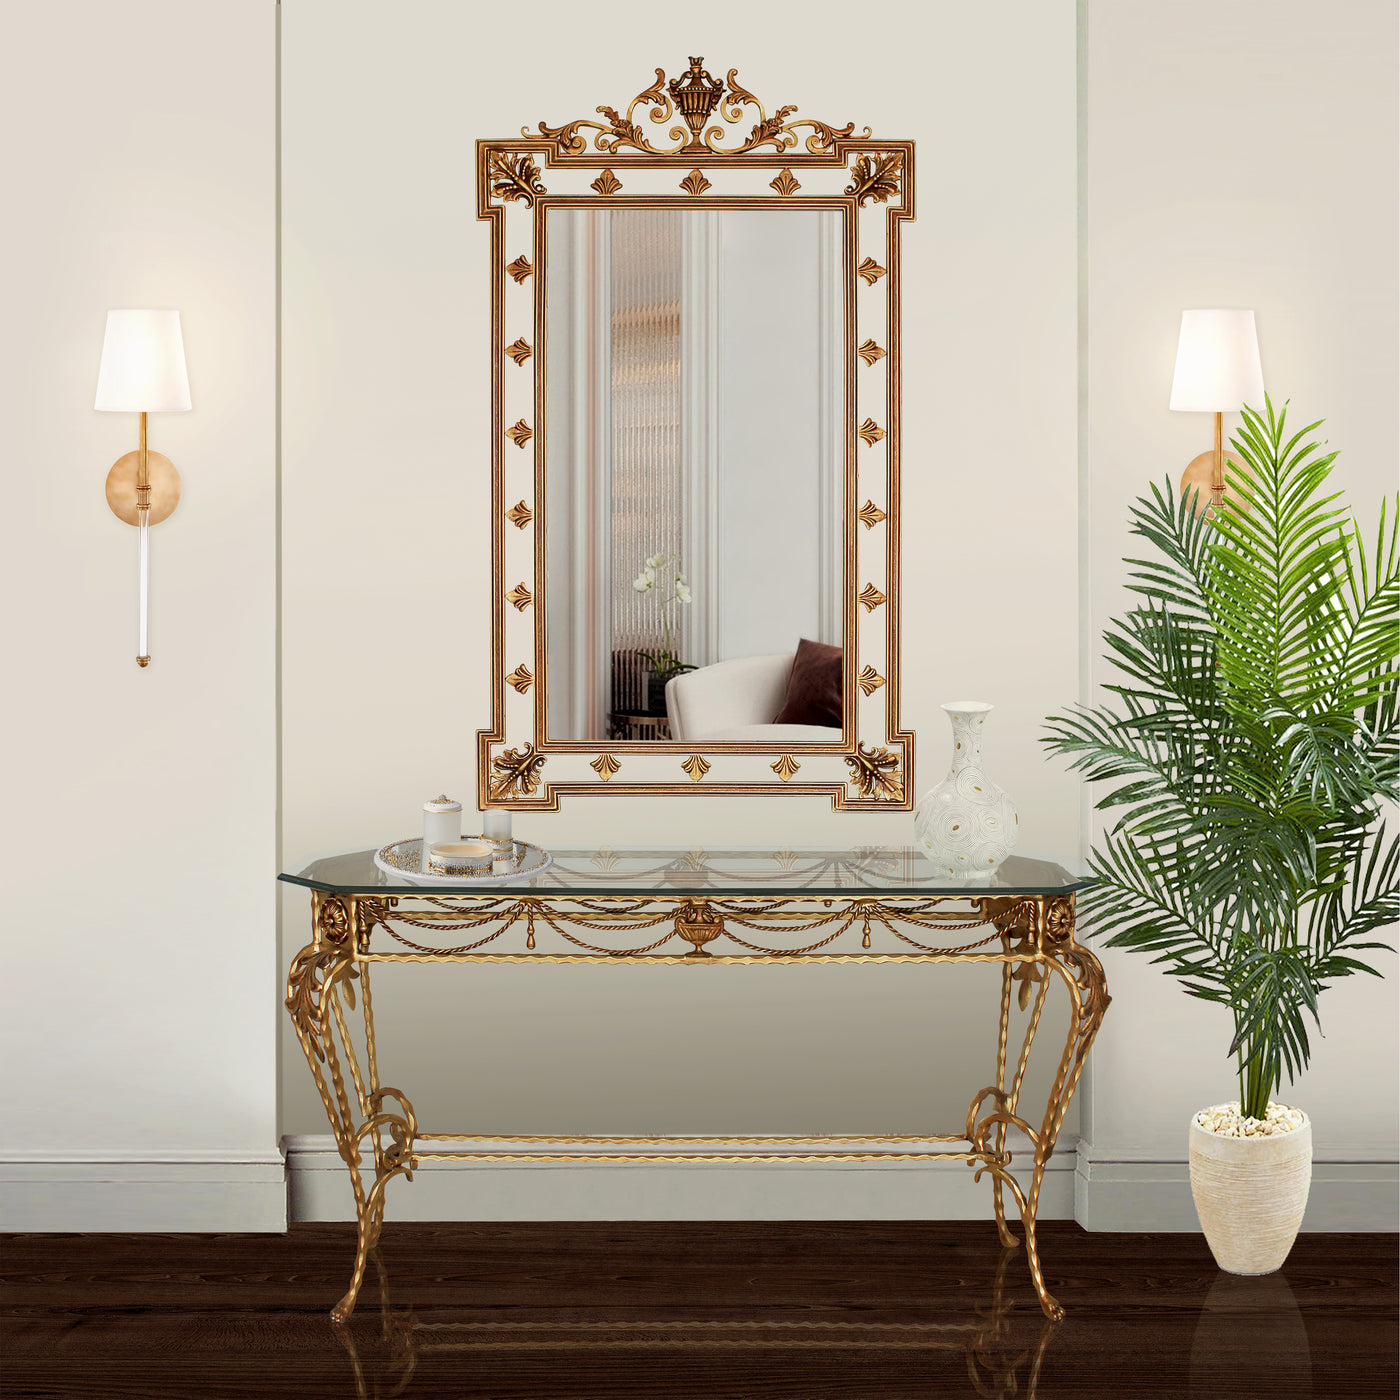 A classical wrought iron console table and mirror painted in an antique golden finish in a luxurious living space